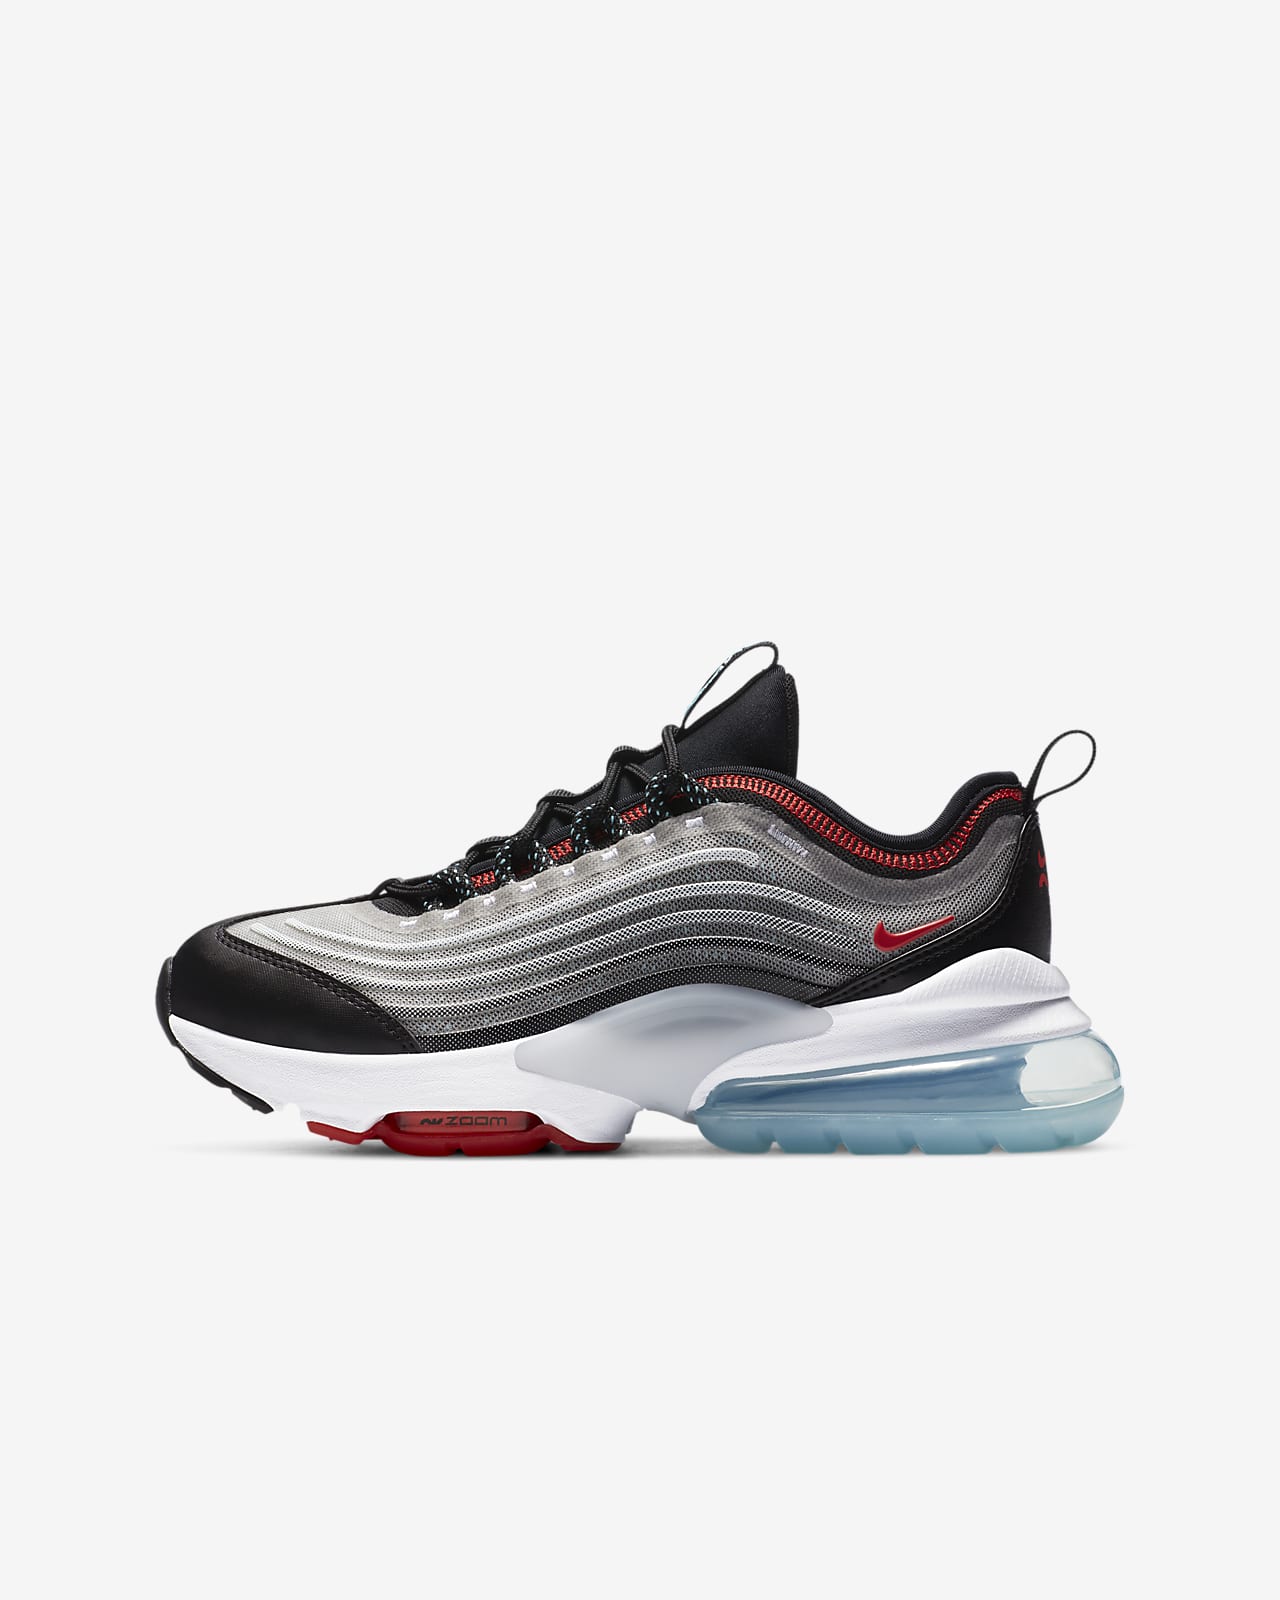 nike shoes with wavy lines